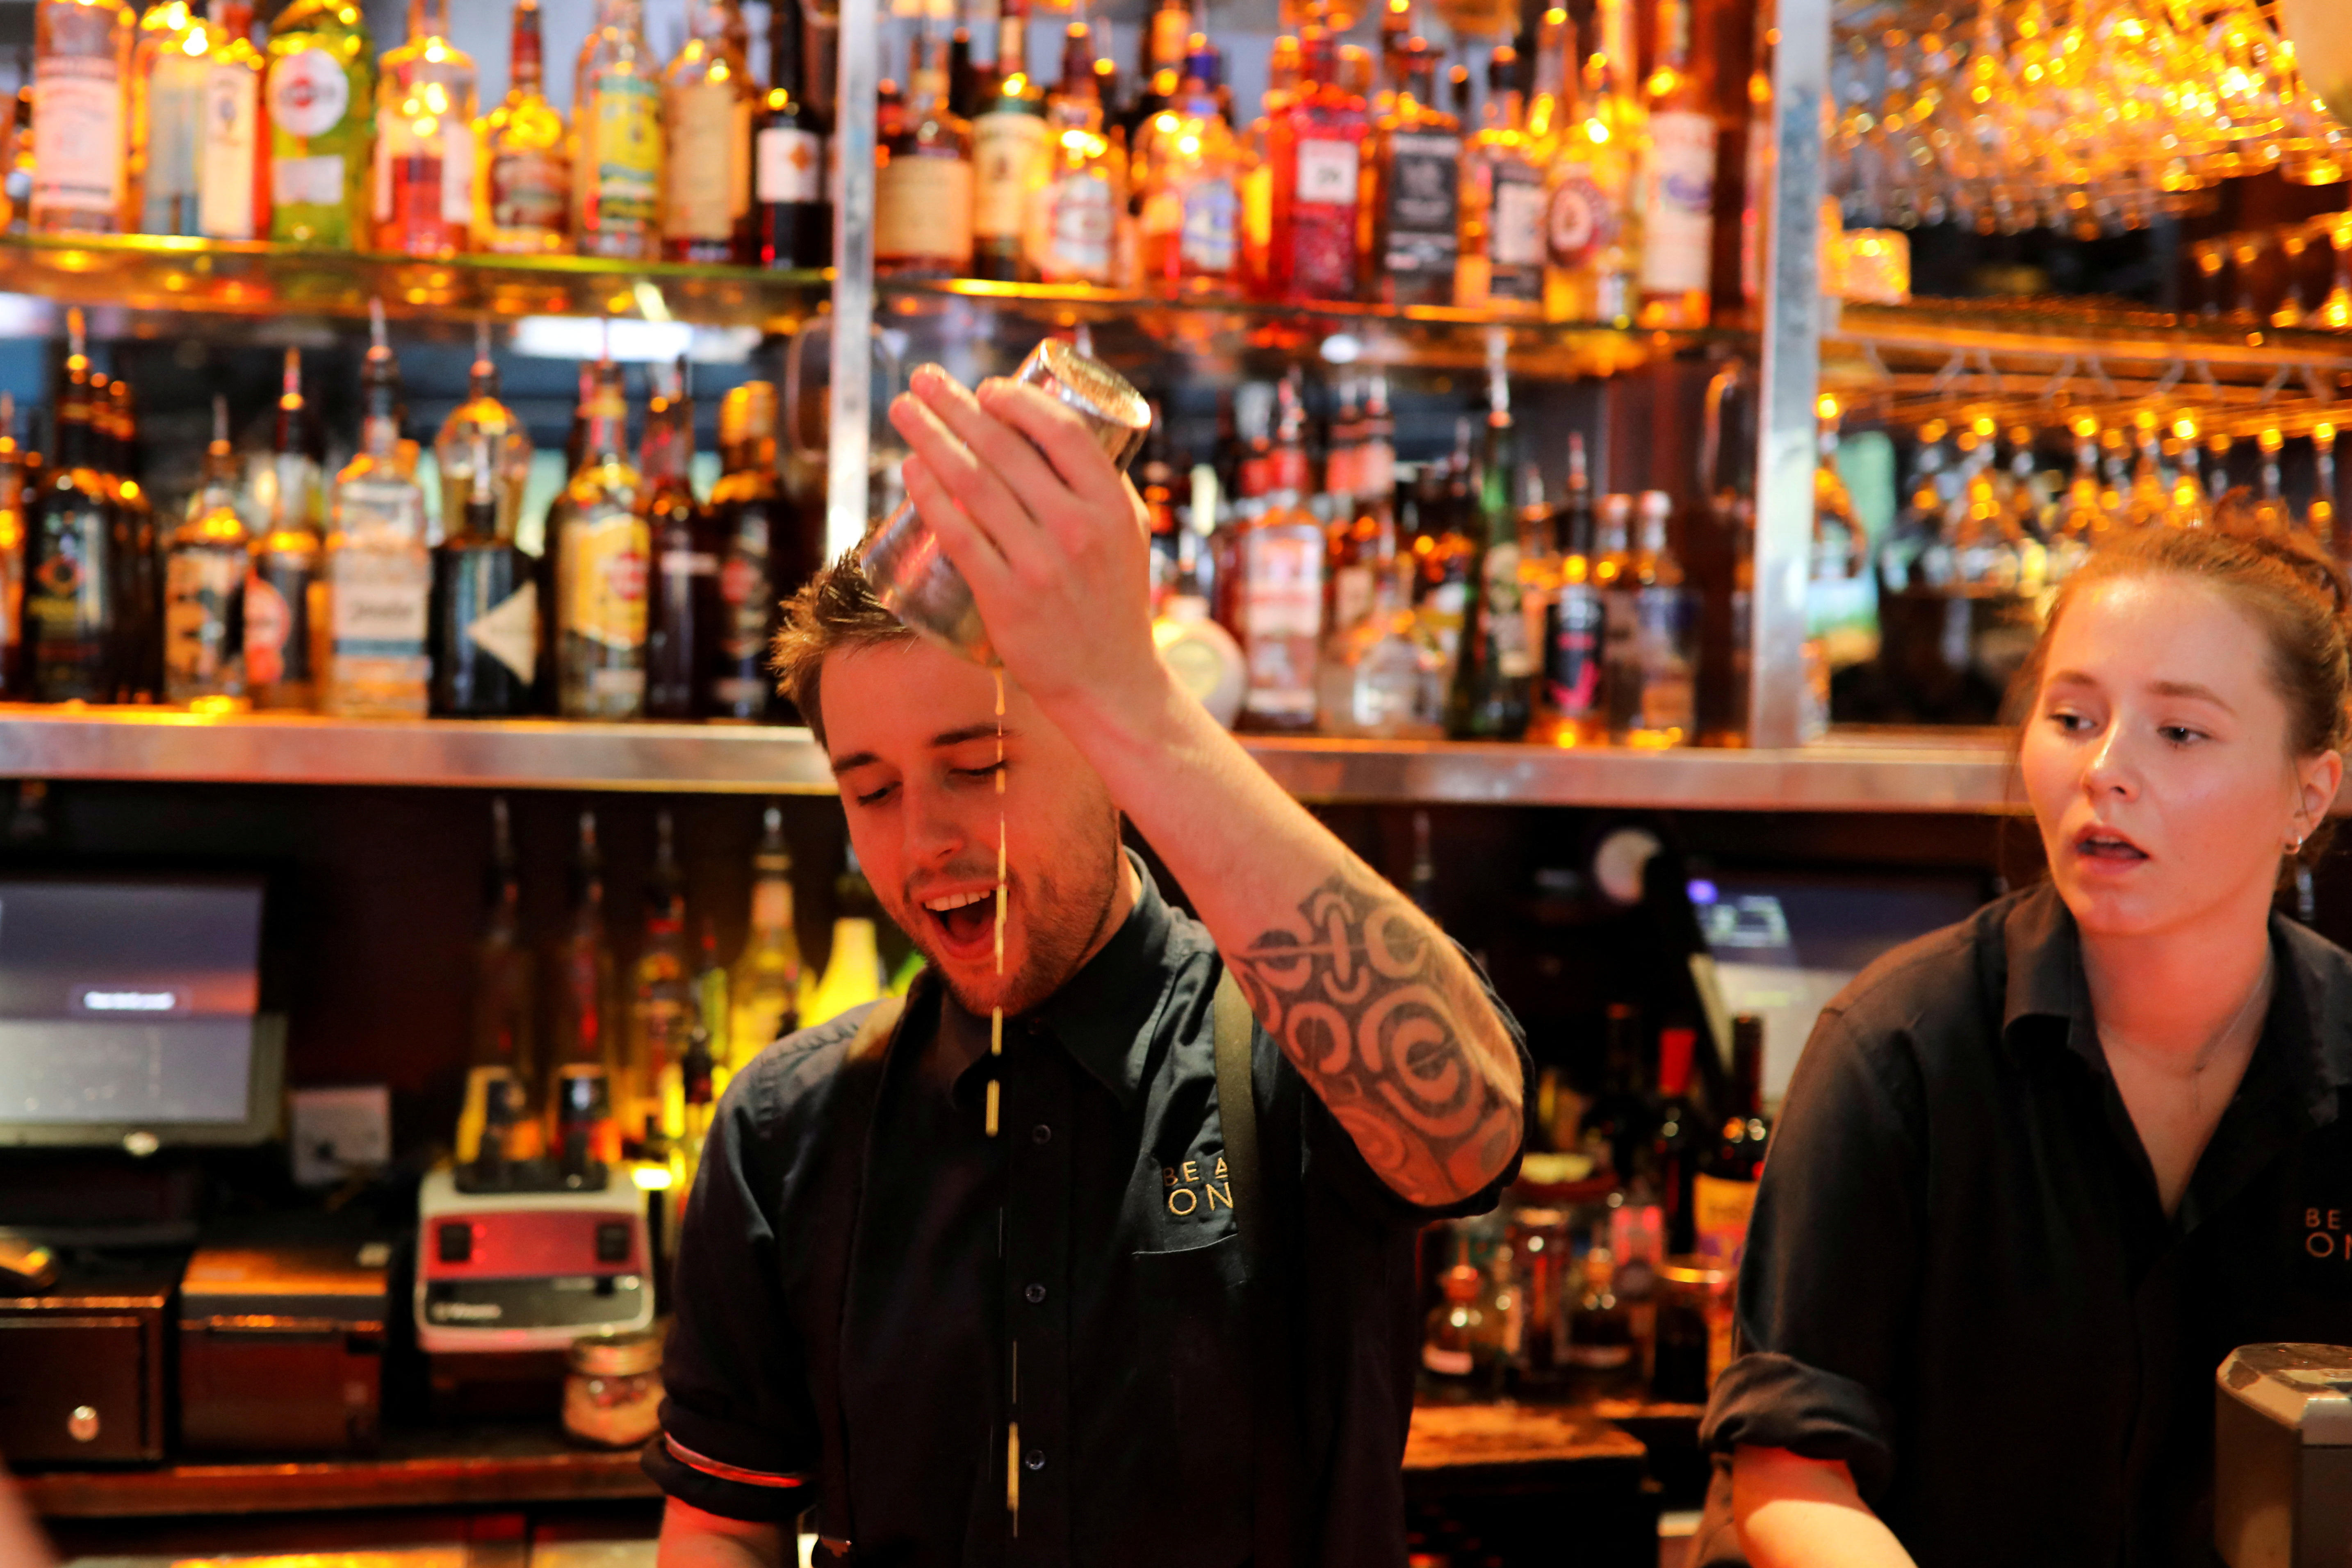 A bartender makes cocktails in a bar in central London